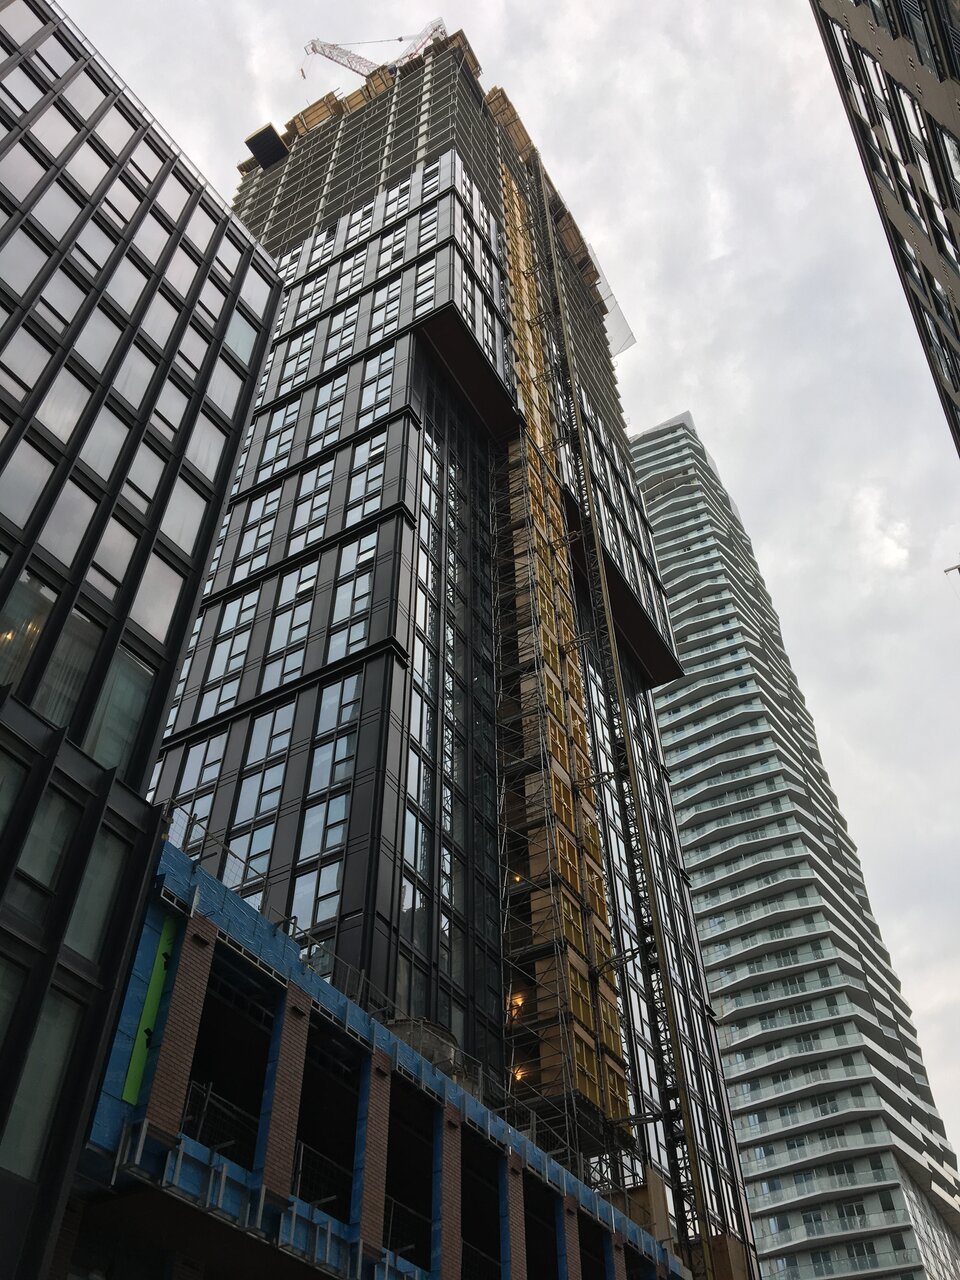 199 Church Approaches 39 Storeys as Construction Continues ...